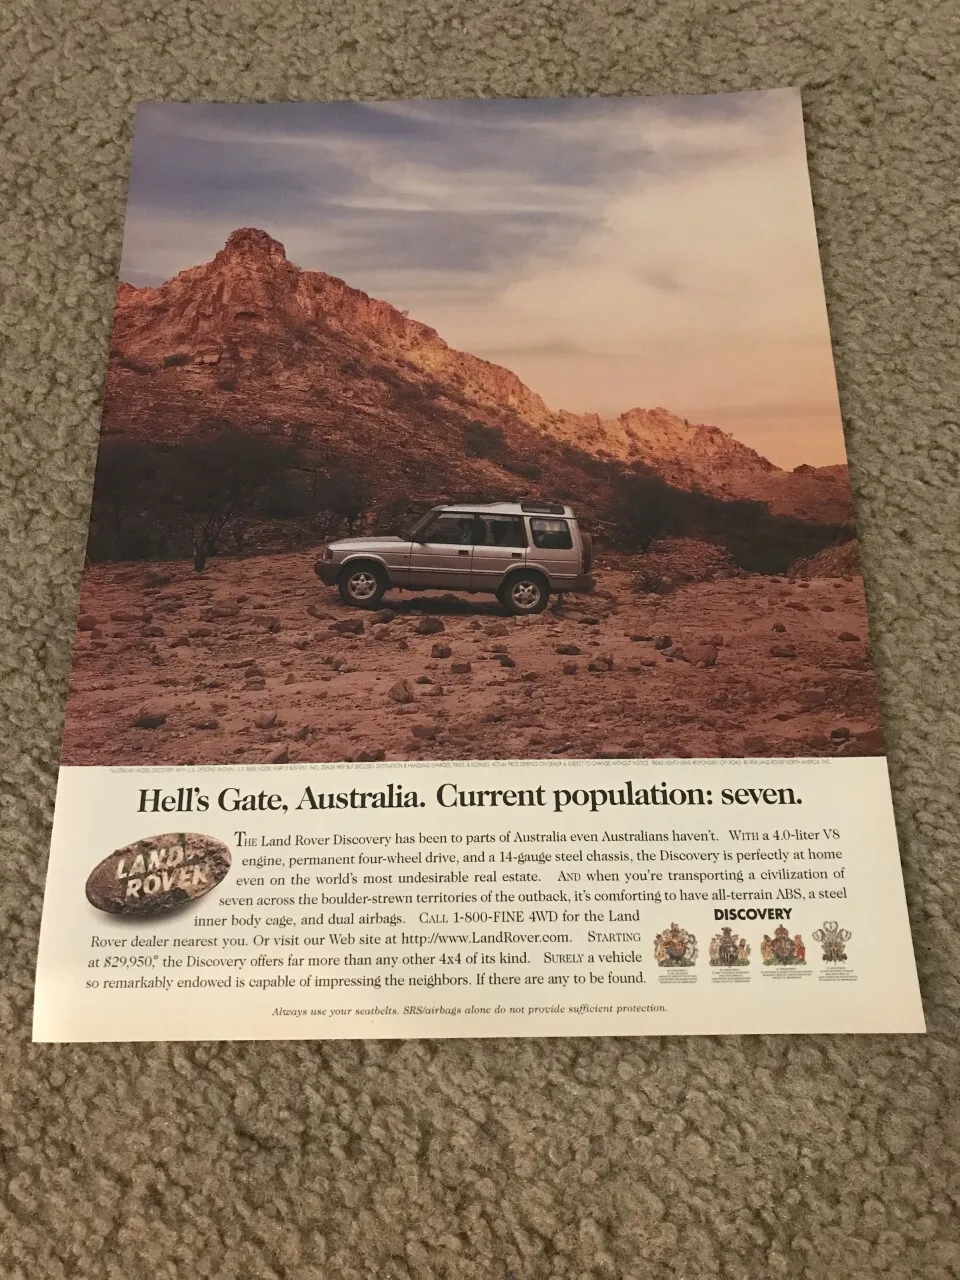 Vintage 1996 Land Rover Discovery Car Print Ad 1990s "hell' Gate Australia"